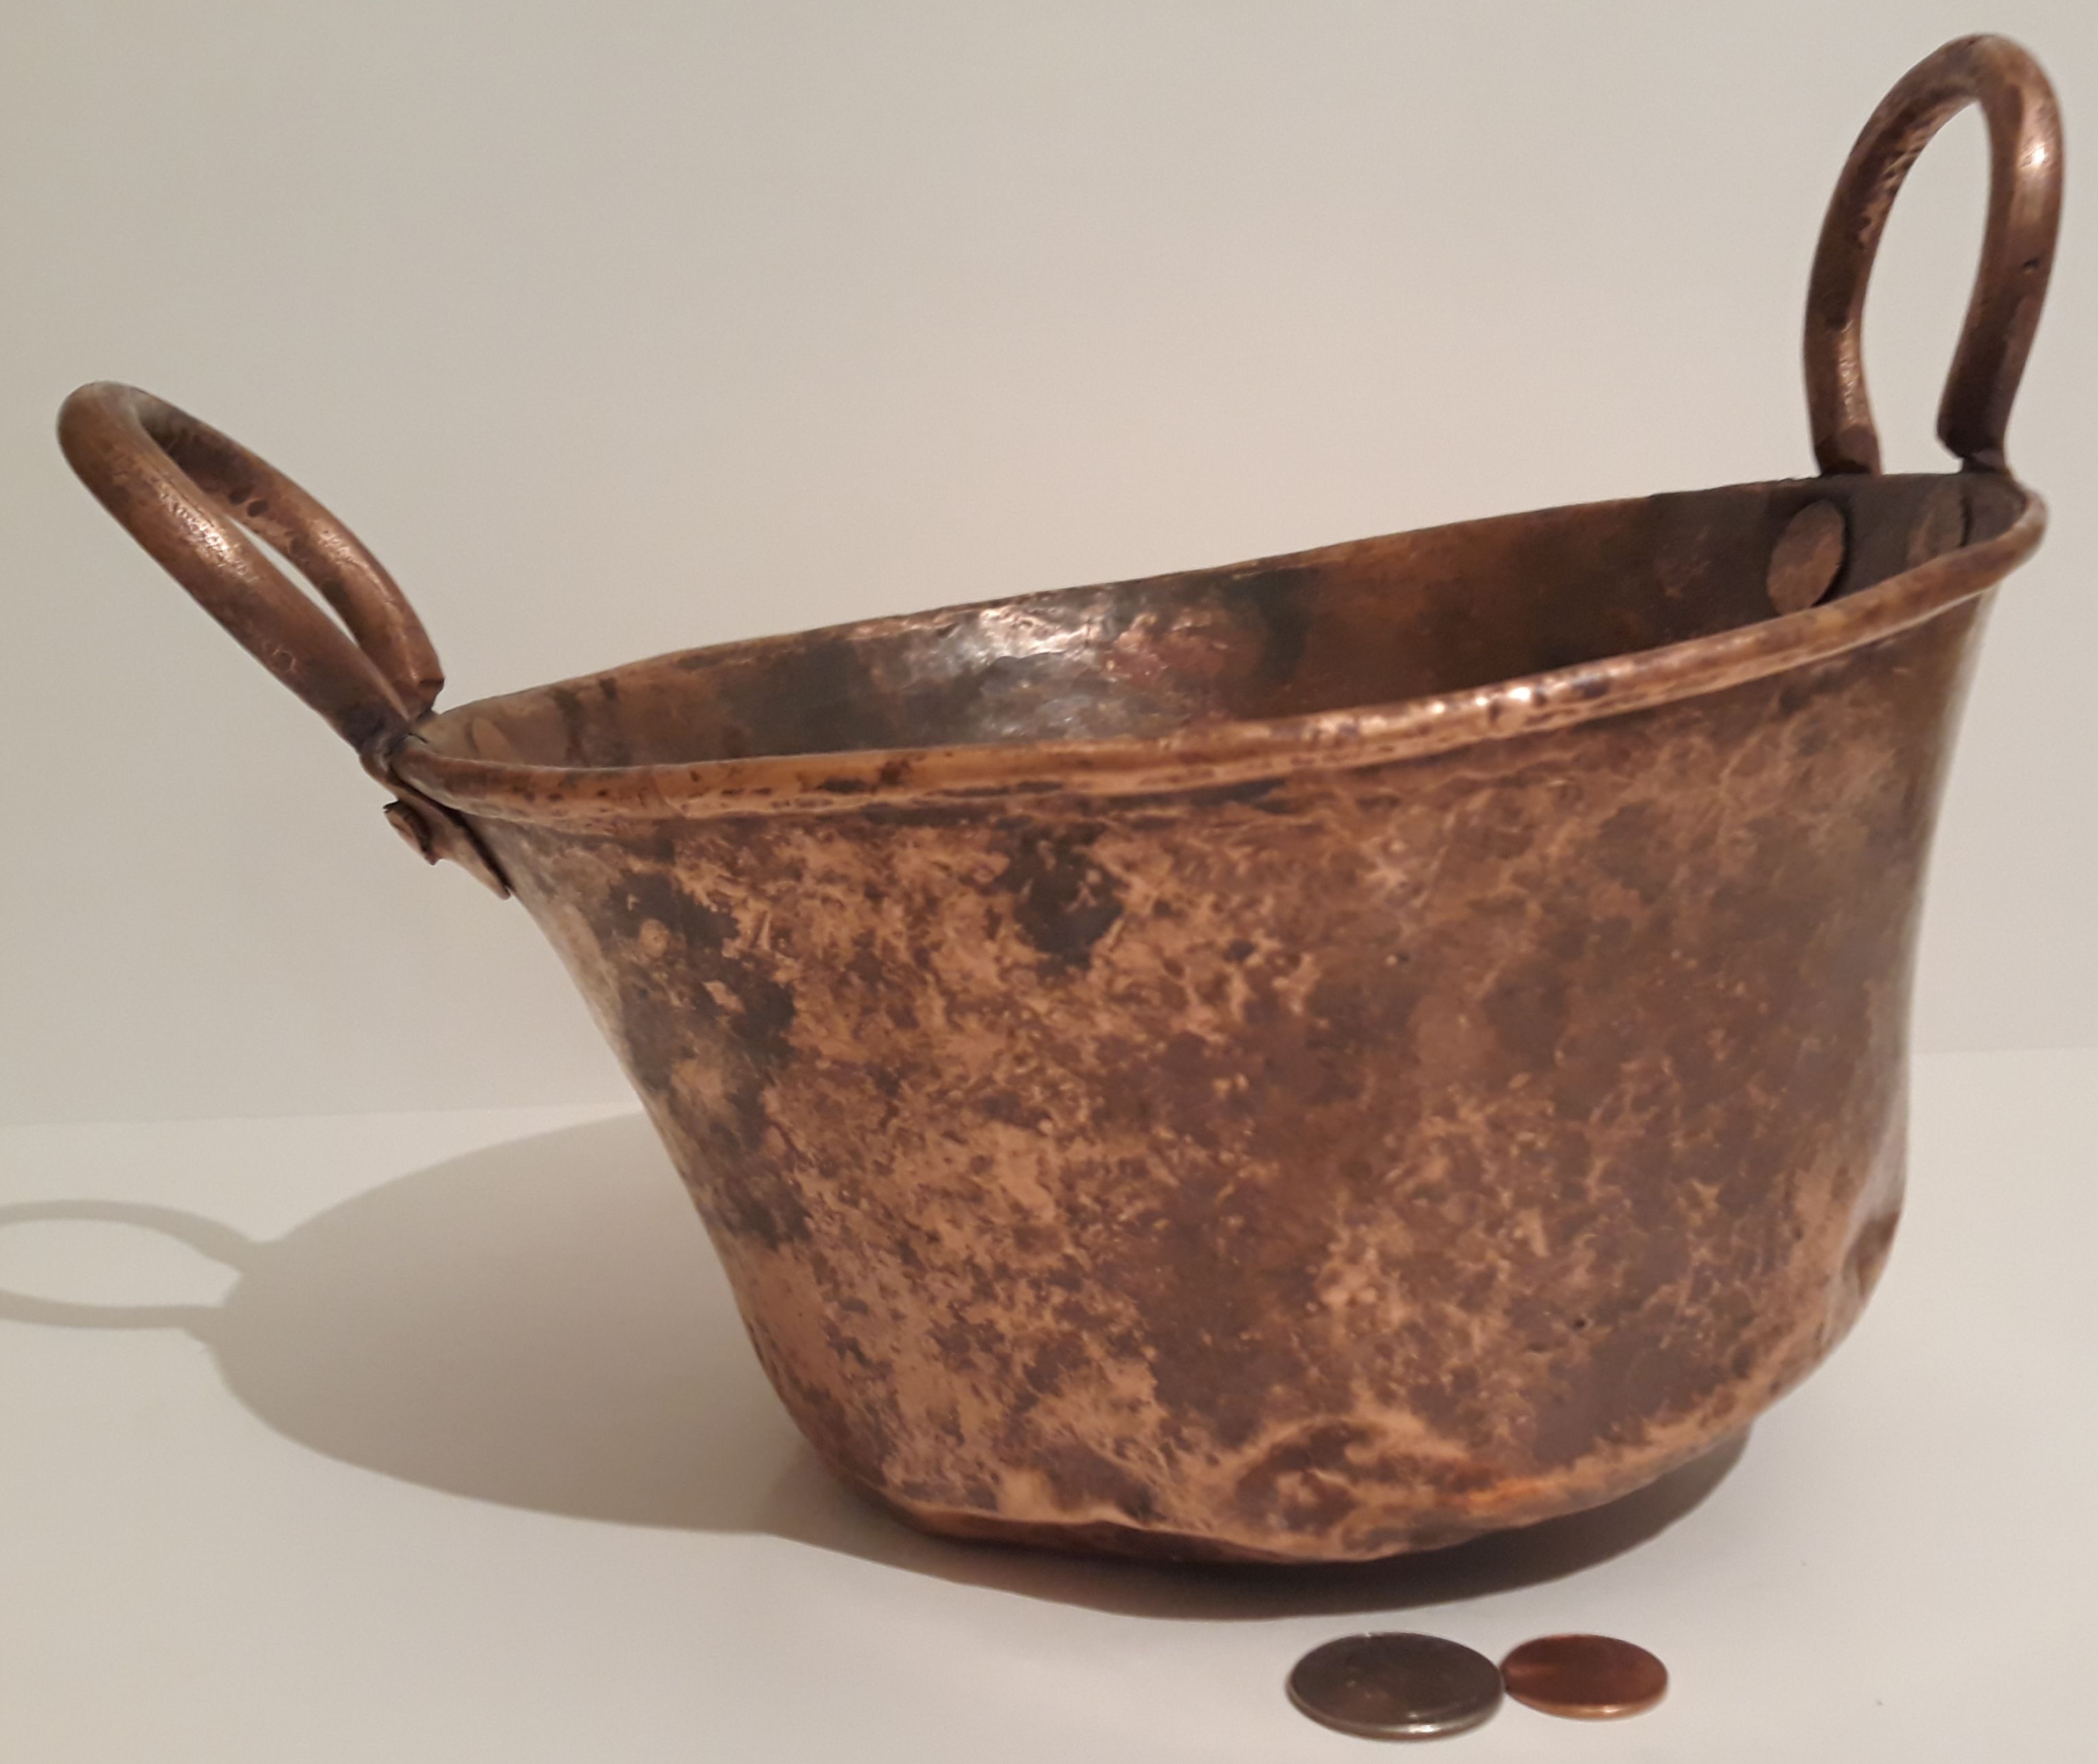 Vintage Antique Copper Pot, Pan, Planter, Cookware, 10" Wide and 9" x 4 1/2" Pan Size", Very Heavy Duty Quality, Kitchen Decor, Hanging Display, Shelf